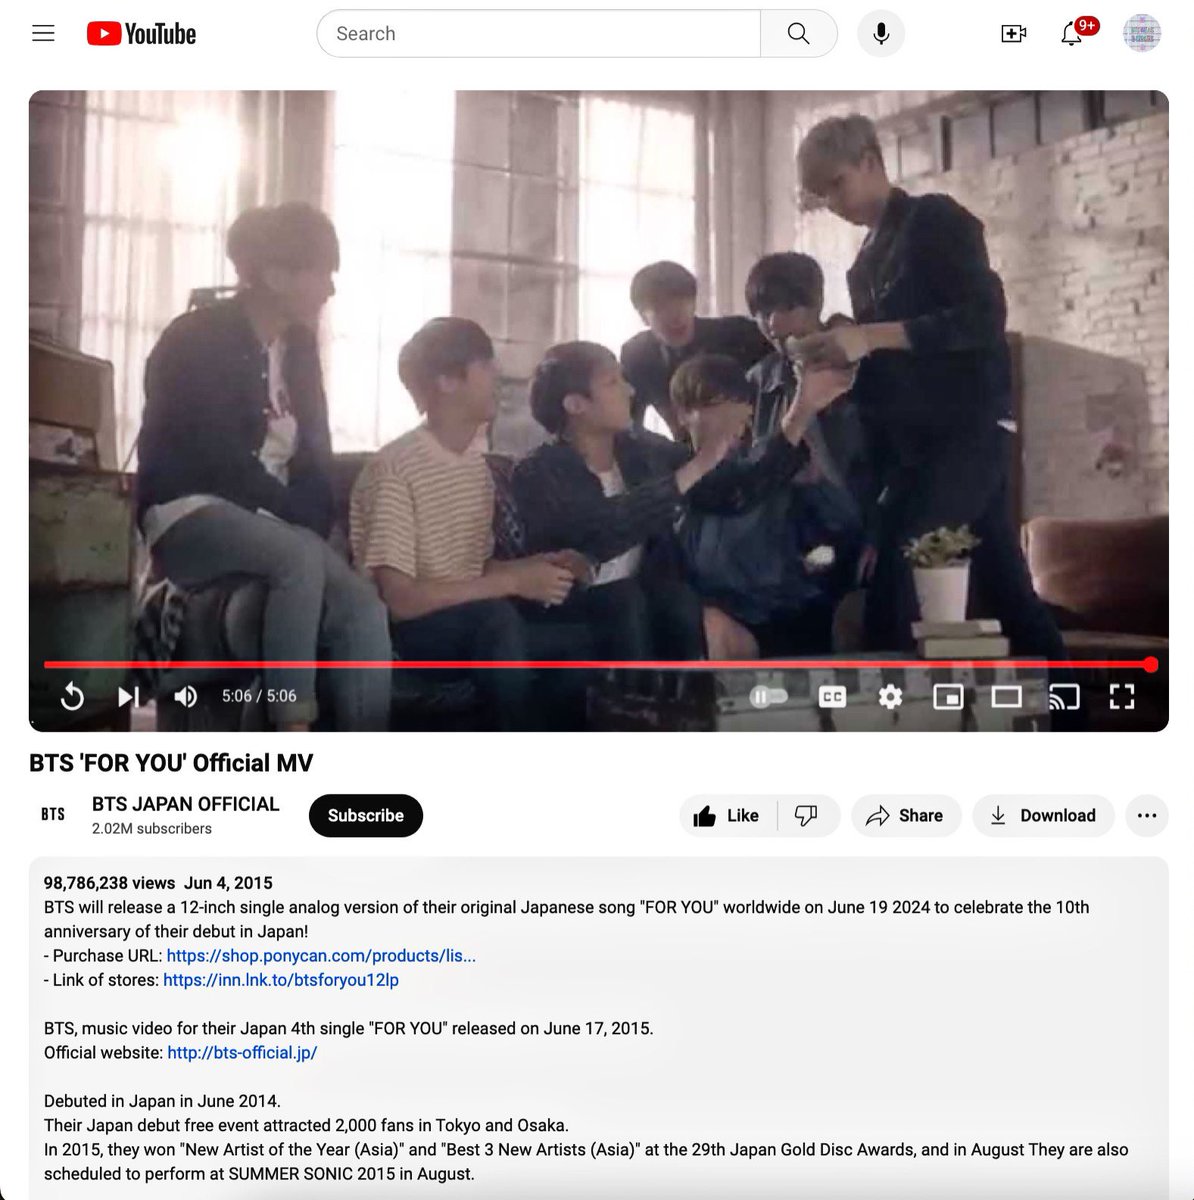 Under BTS ‘FOR YOU’ Official MV Description BTS will release a 12-inch single analog version of their original Japanese song 'FOR YOU' worldwide on June 19 2024 to celebrate the 10th anniversary of their debut in Japan! -Purchase URL: shop.ponycan.com/products/list?… - Link of Stores:…